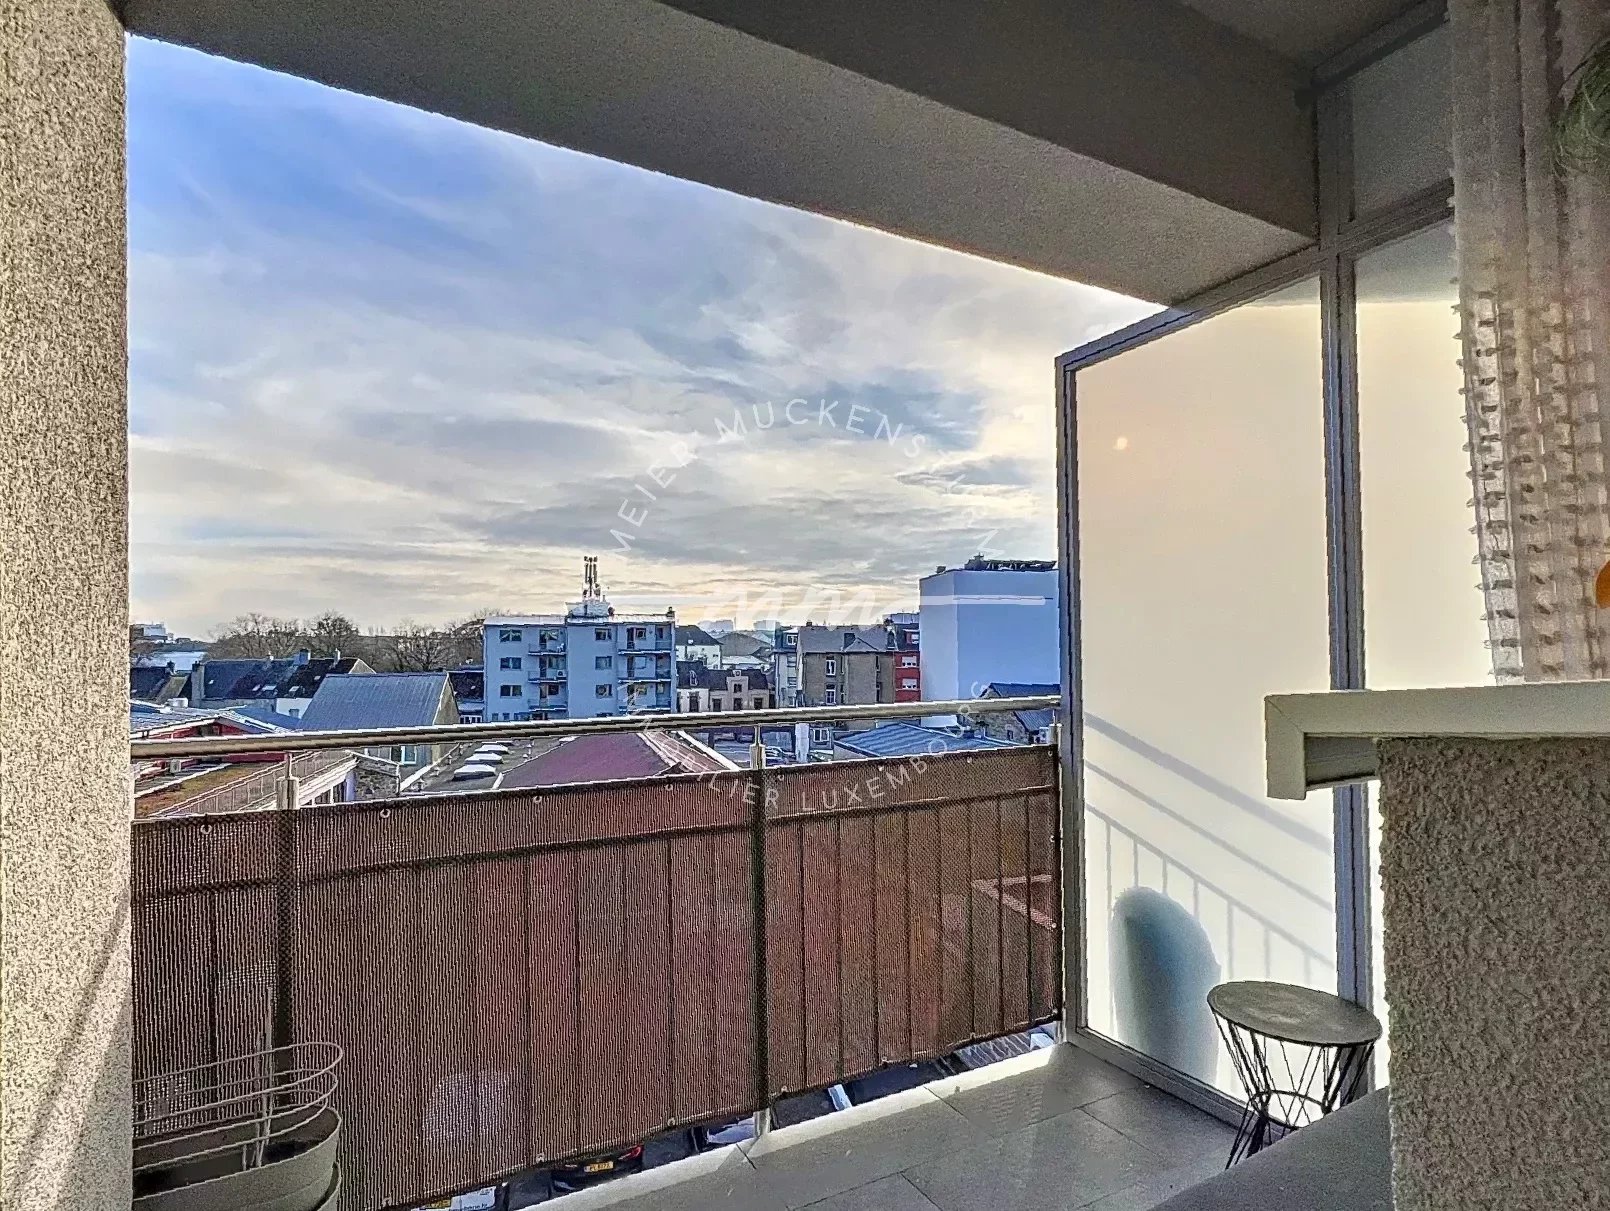 2 bedroom flat for sale in luxembourg-city